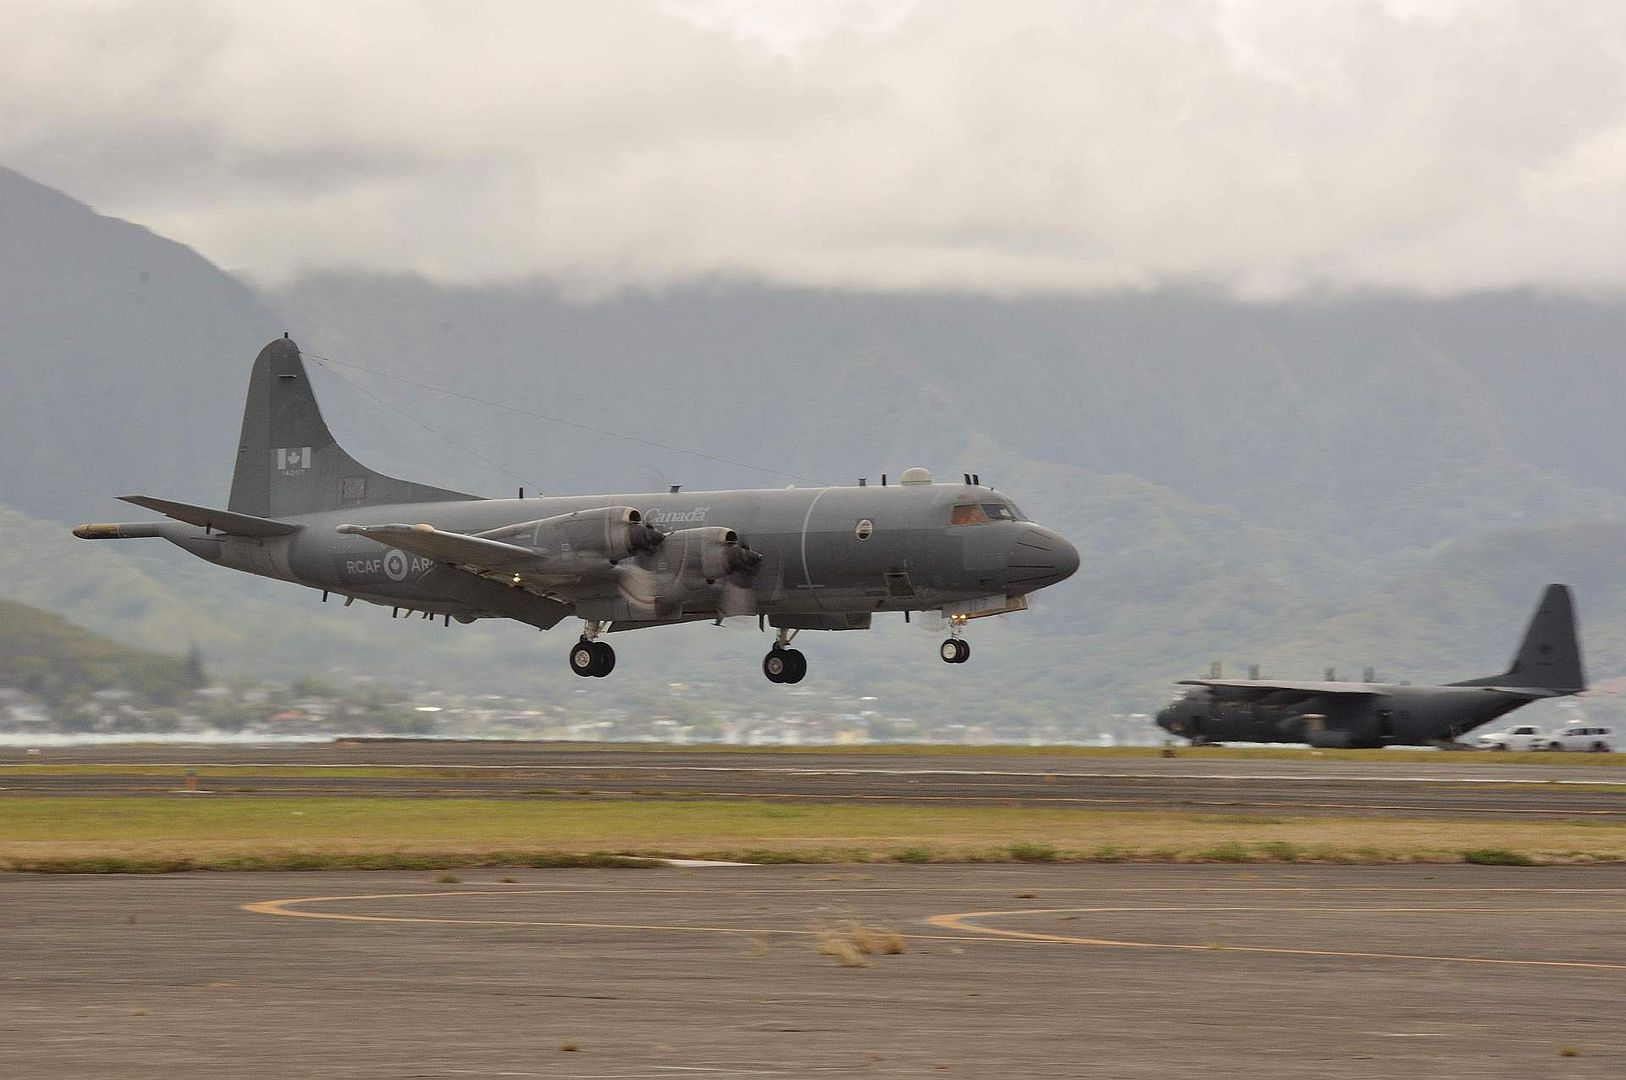 140 Aurora From 407 Long Range Patrol Squadron Arrives At Marine Corps Base Hawaii Kaneohe Bay Hawaii July 6 For Rim Of The Pacific